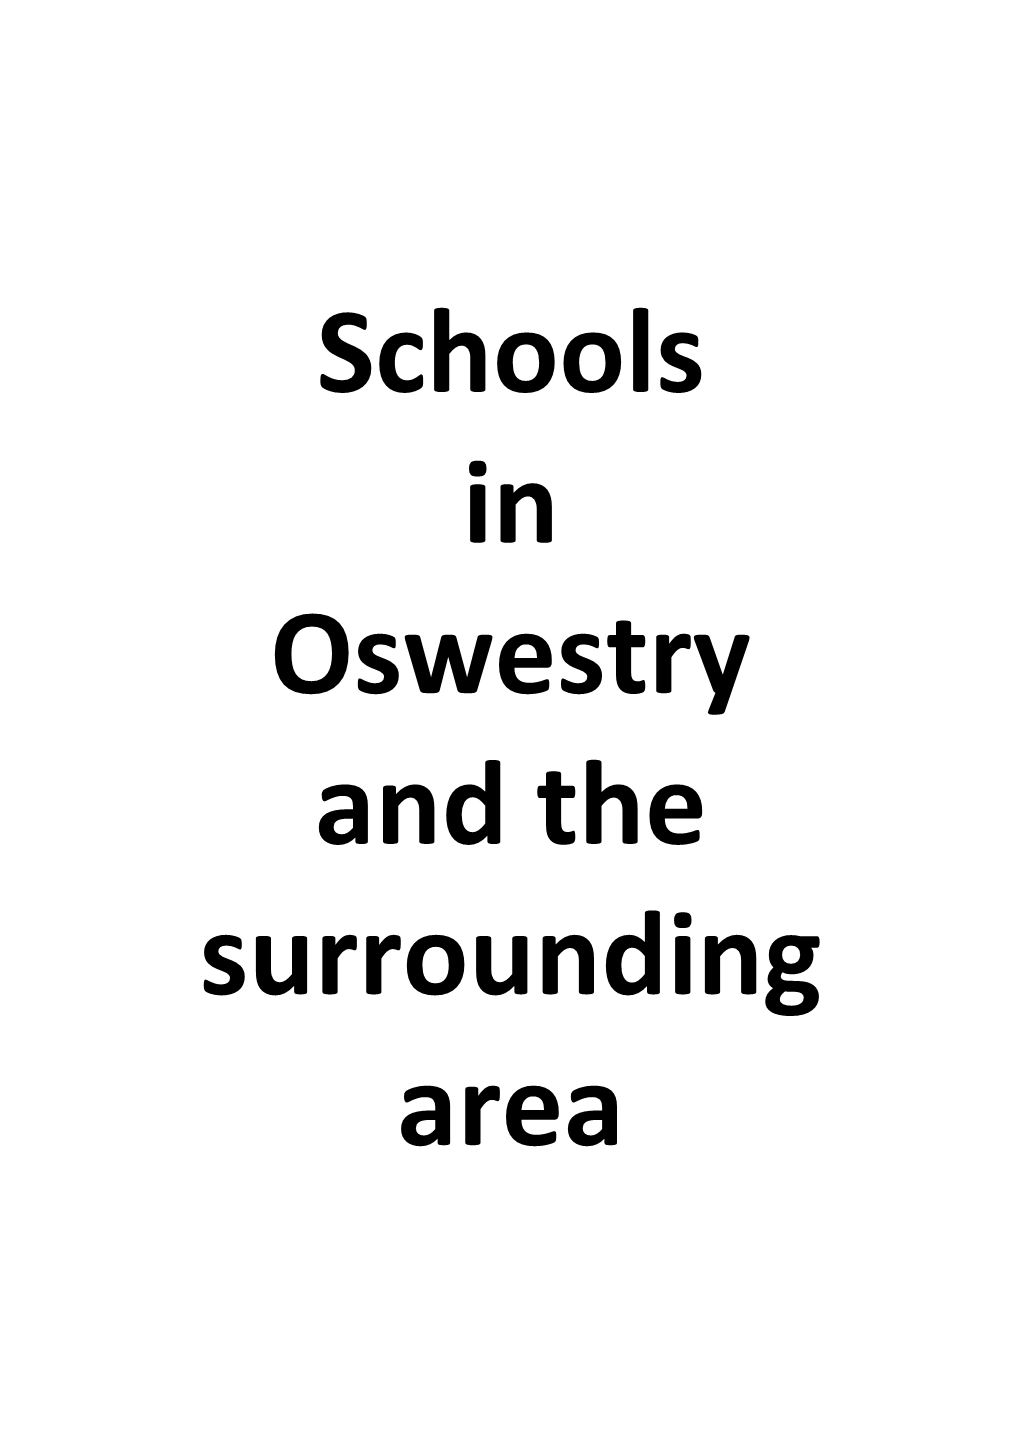 Schools-In-Oswestry-Surr-Area-V4